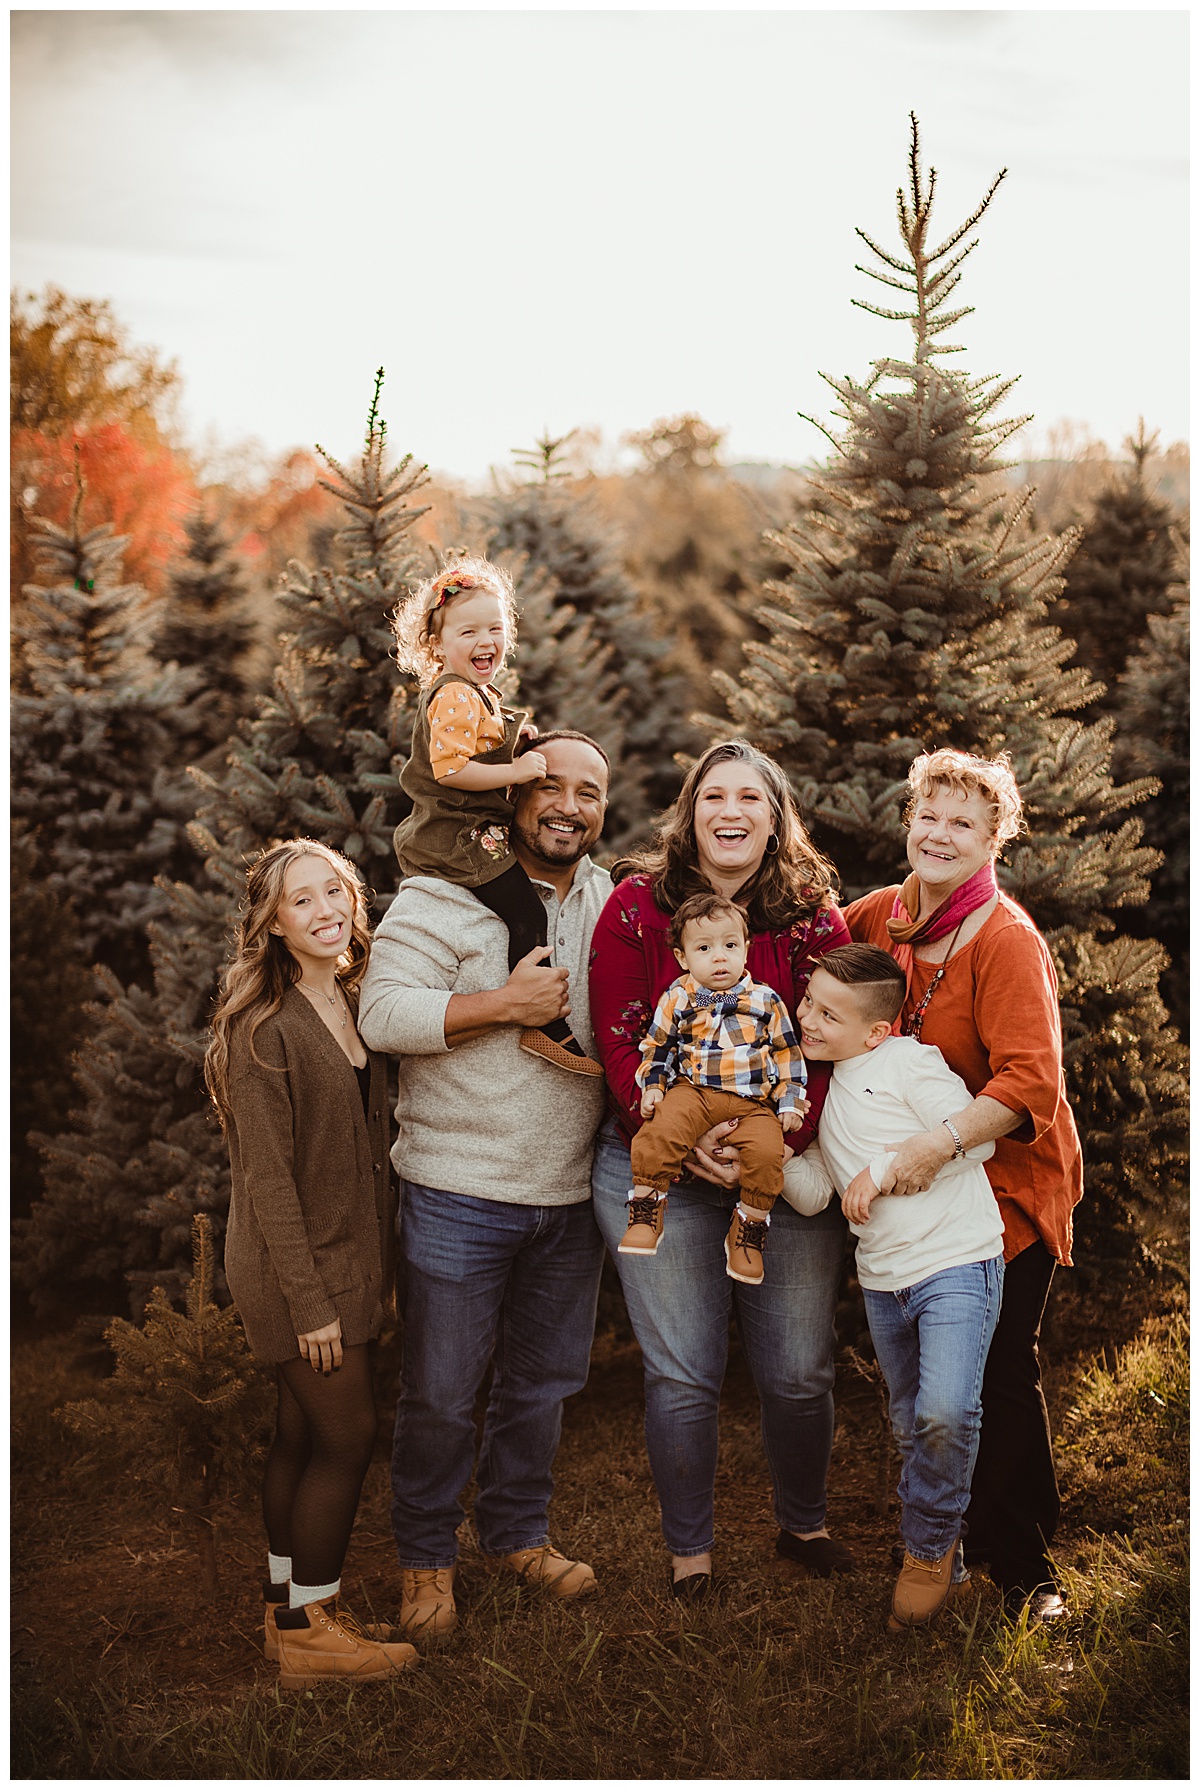 Family in front if trees by Norma Fayak Photography